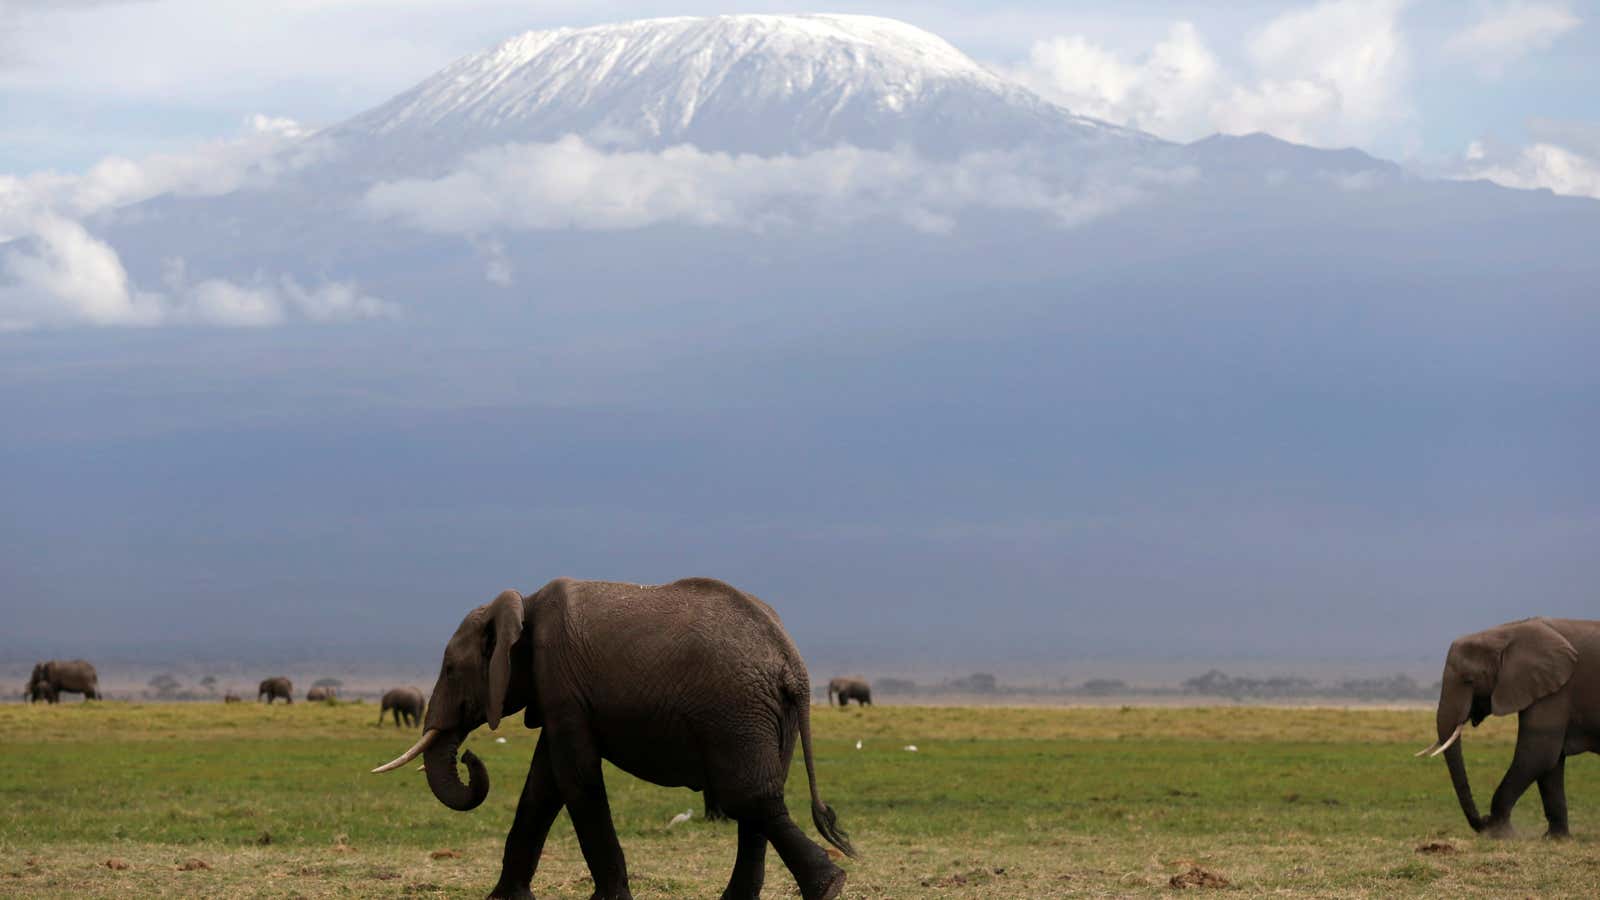 Increasing land use could turn Mount Kilimanjaro into an ecological island.